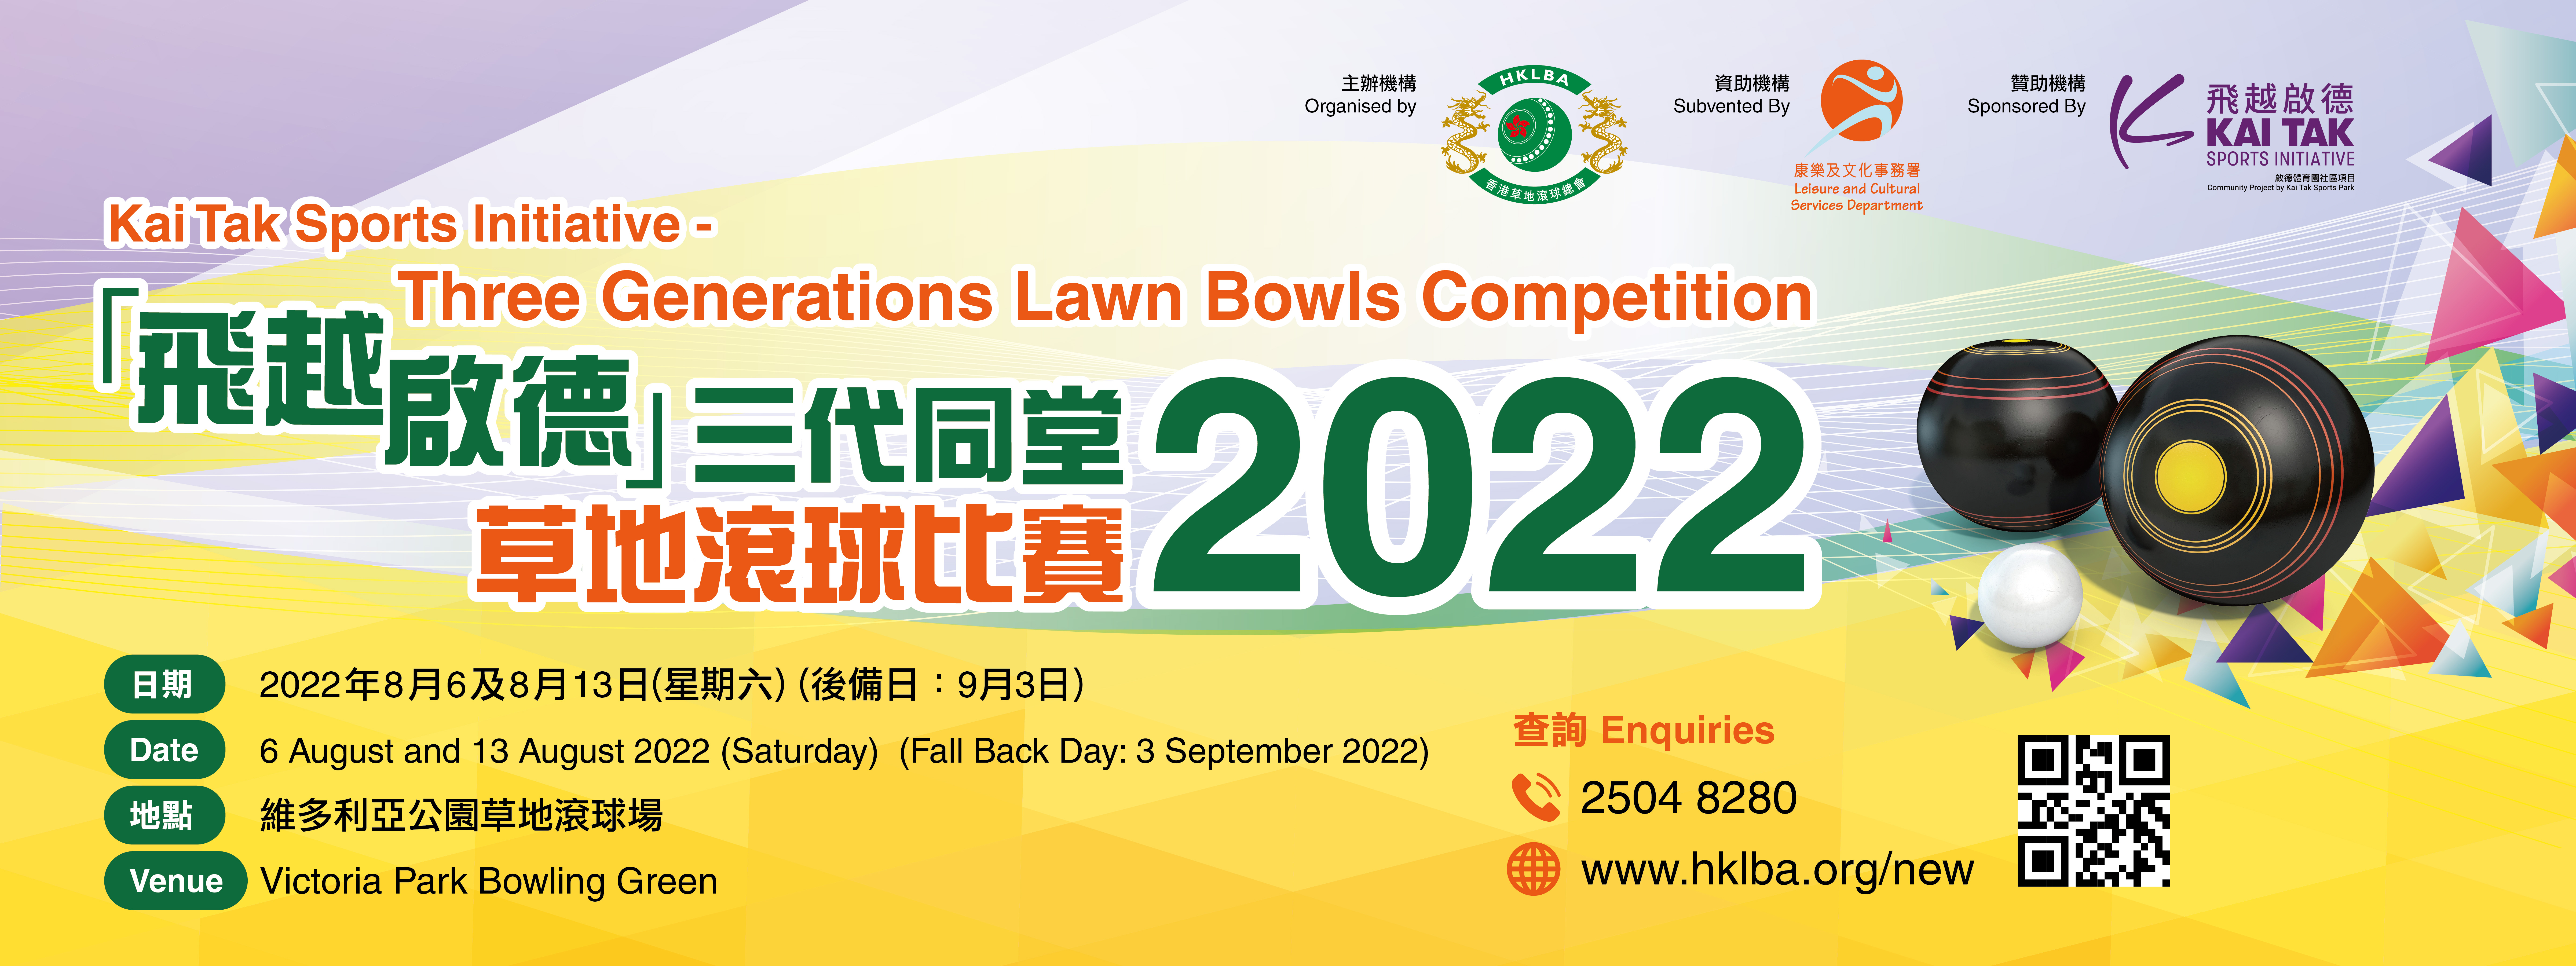 [Fixture] KTSI Three Generations Lawn Bowls Competition 2022